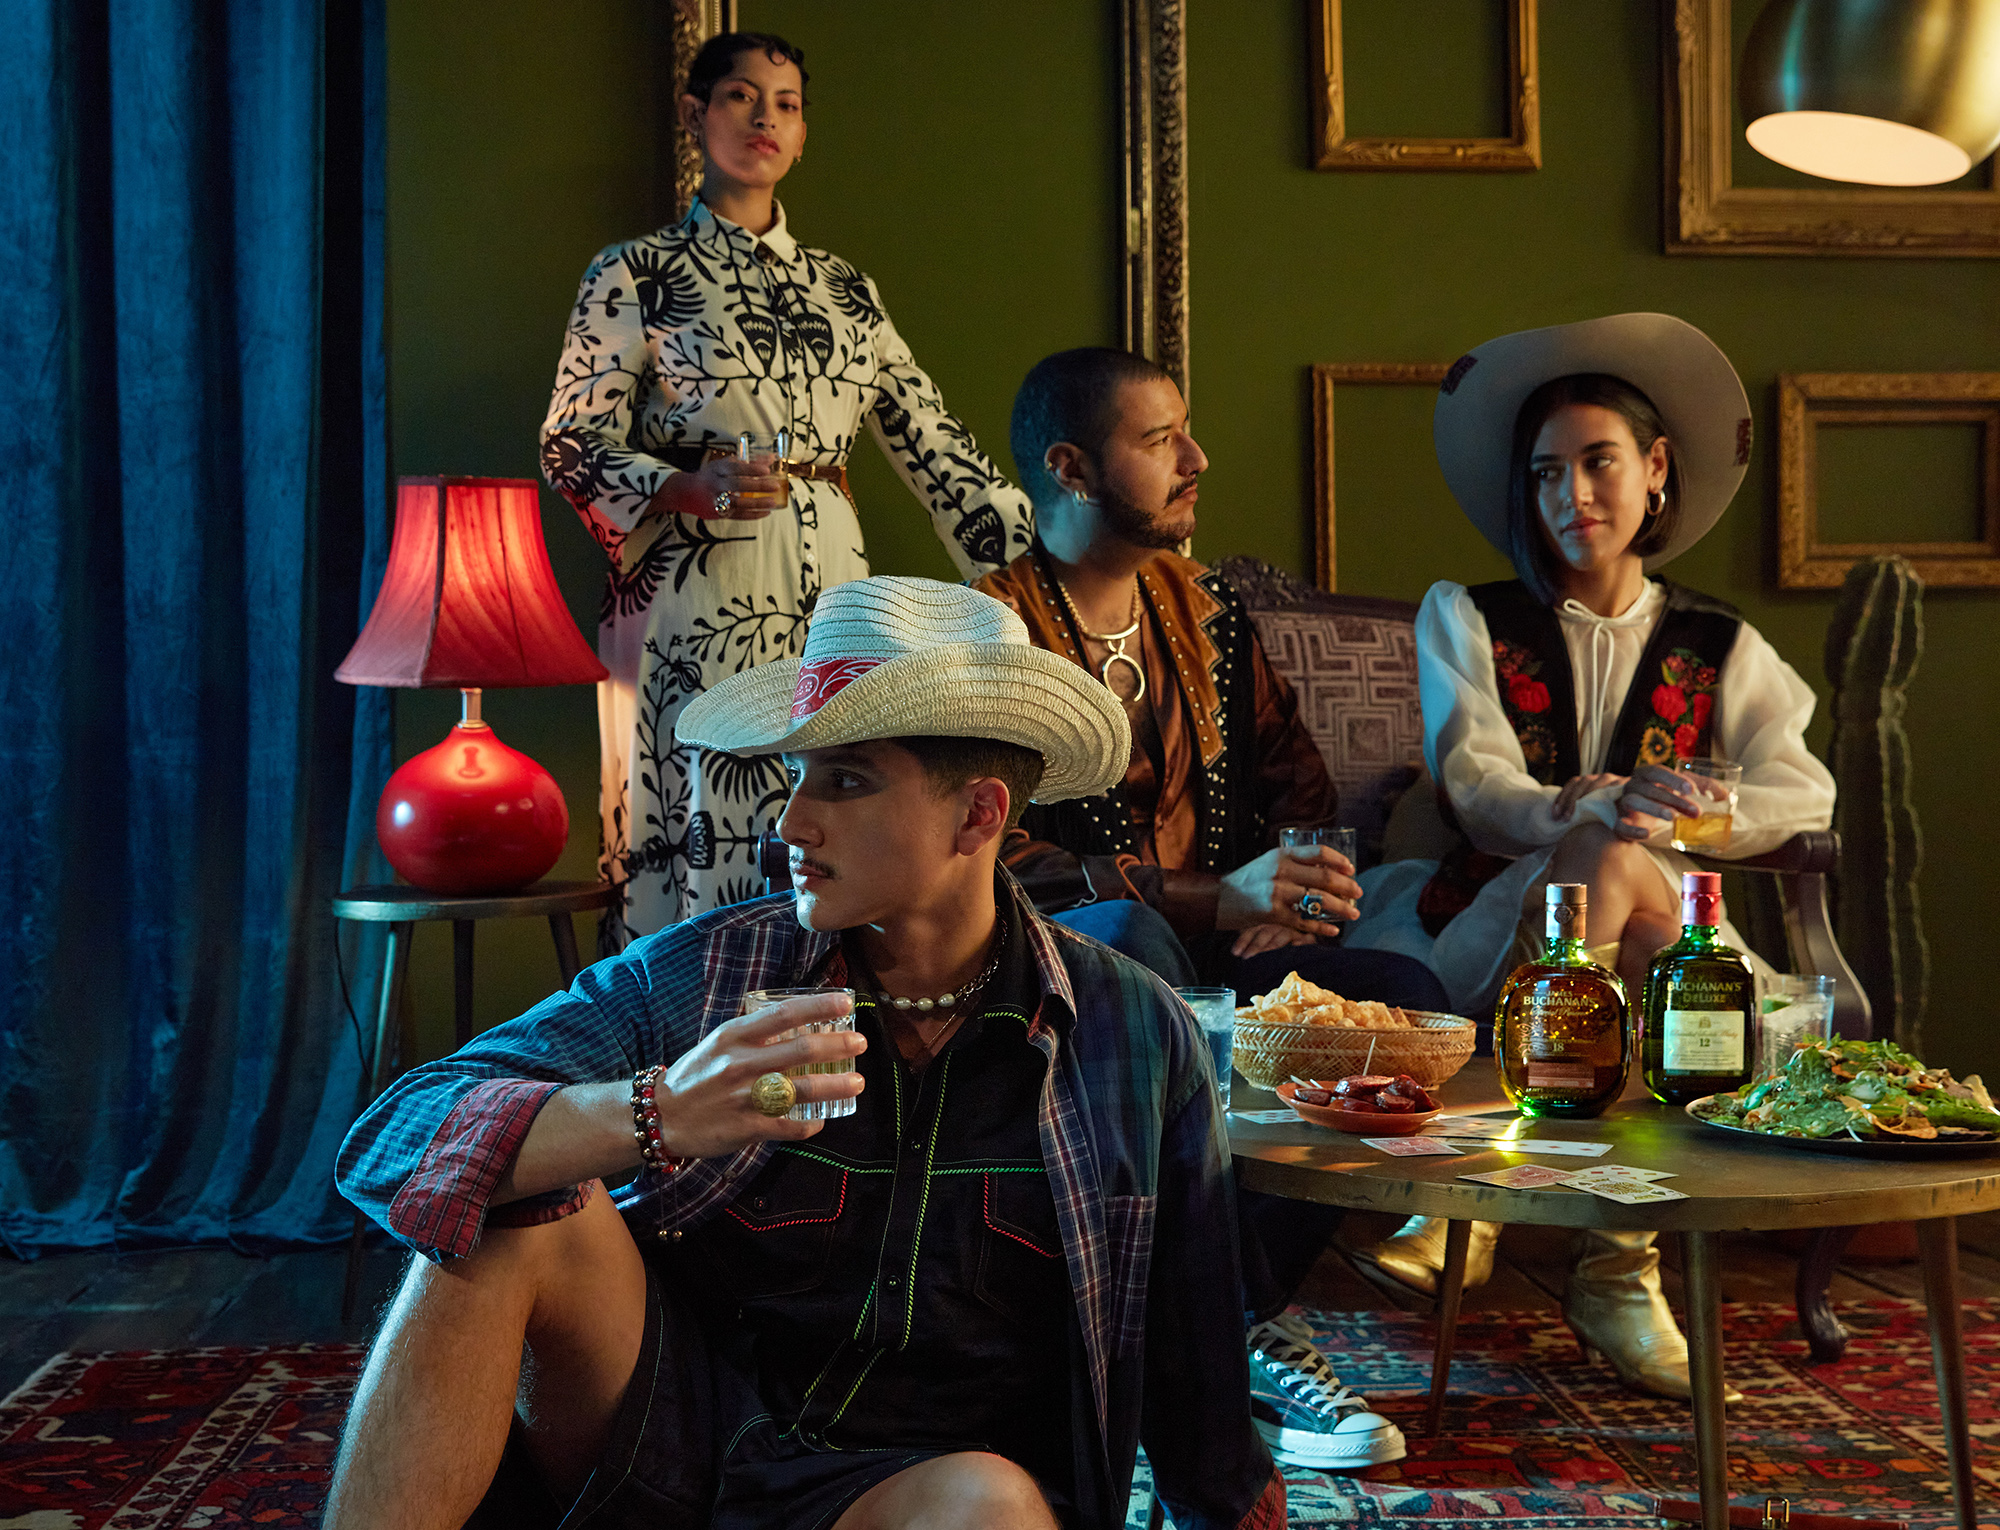 Buchanan's Whisky’s “What Glory We Are” Campaign Celebrates Hispanic American Culture and Traditions